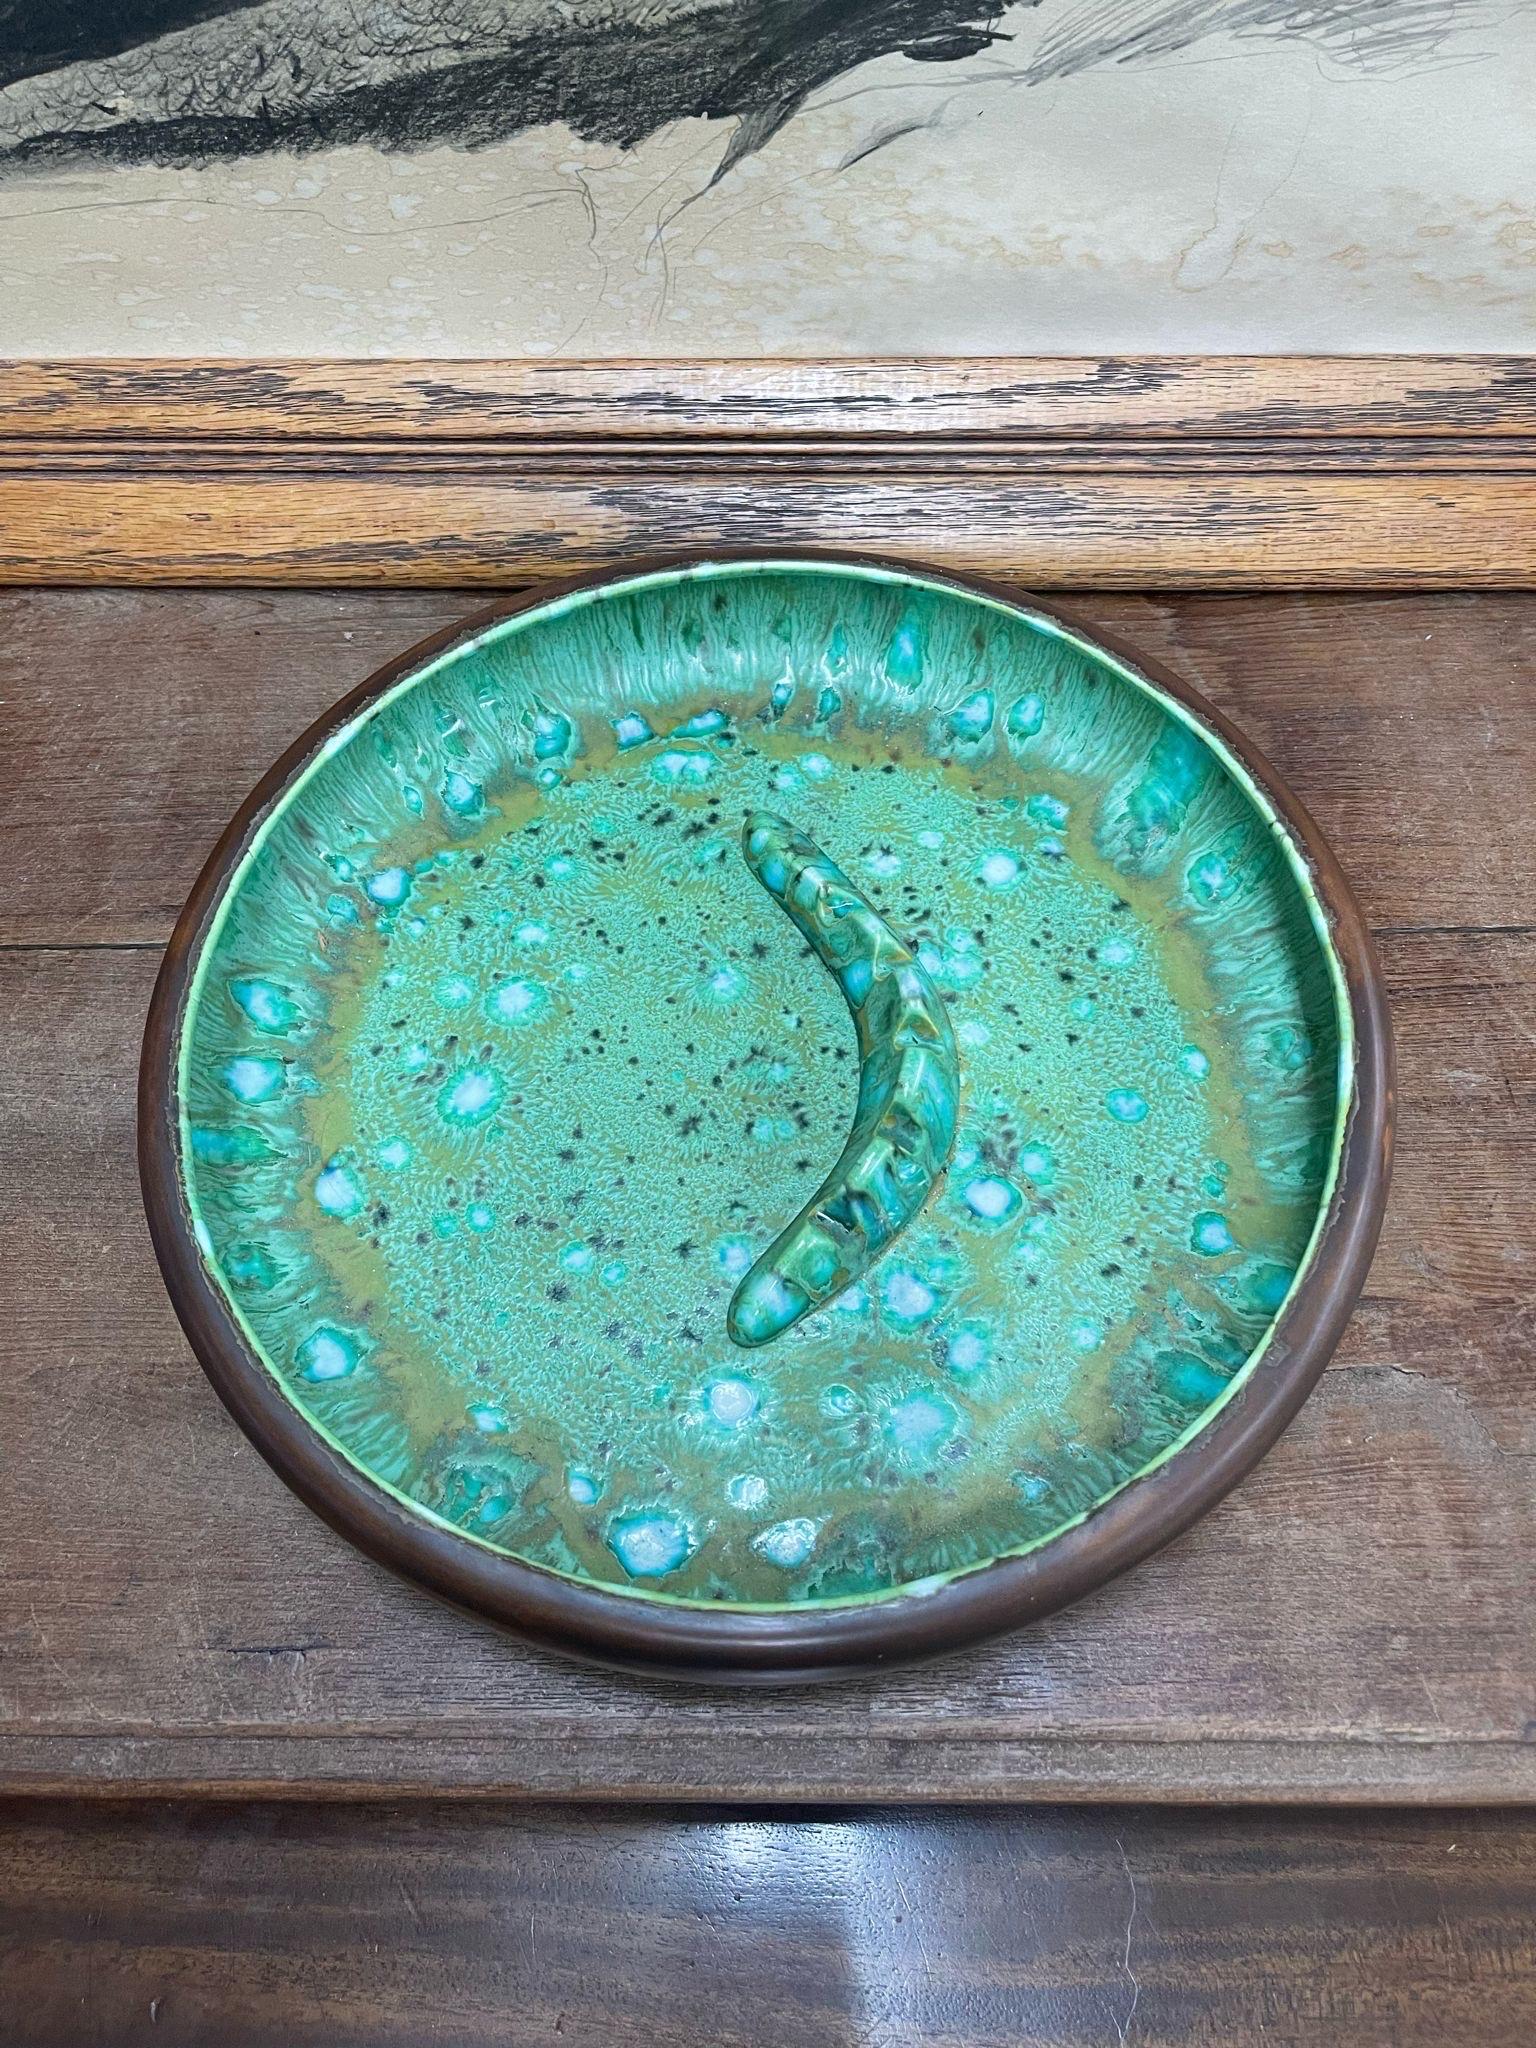 Ceramic Vintage Mid Century Modern Large Ash Tray Dish With Beautiful Glazed Interior. For Sale